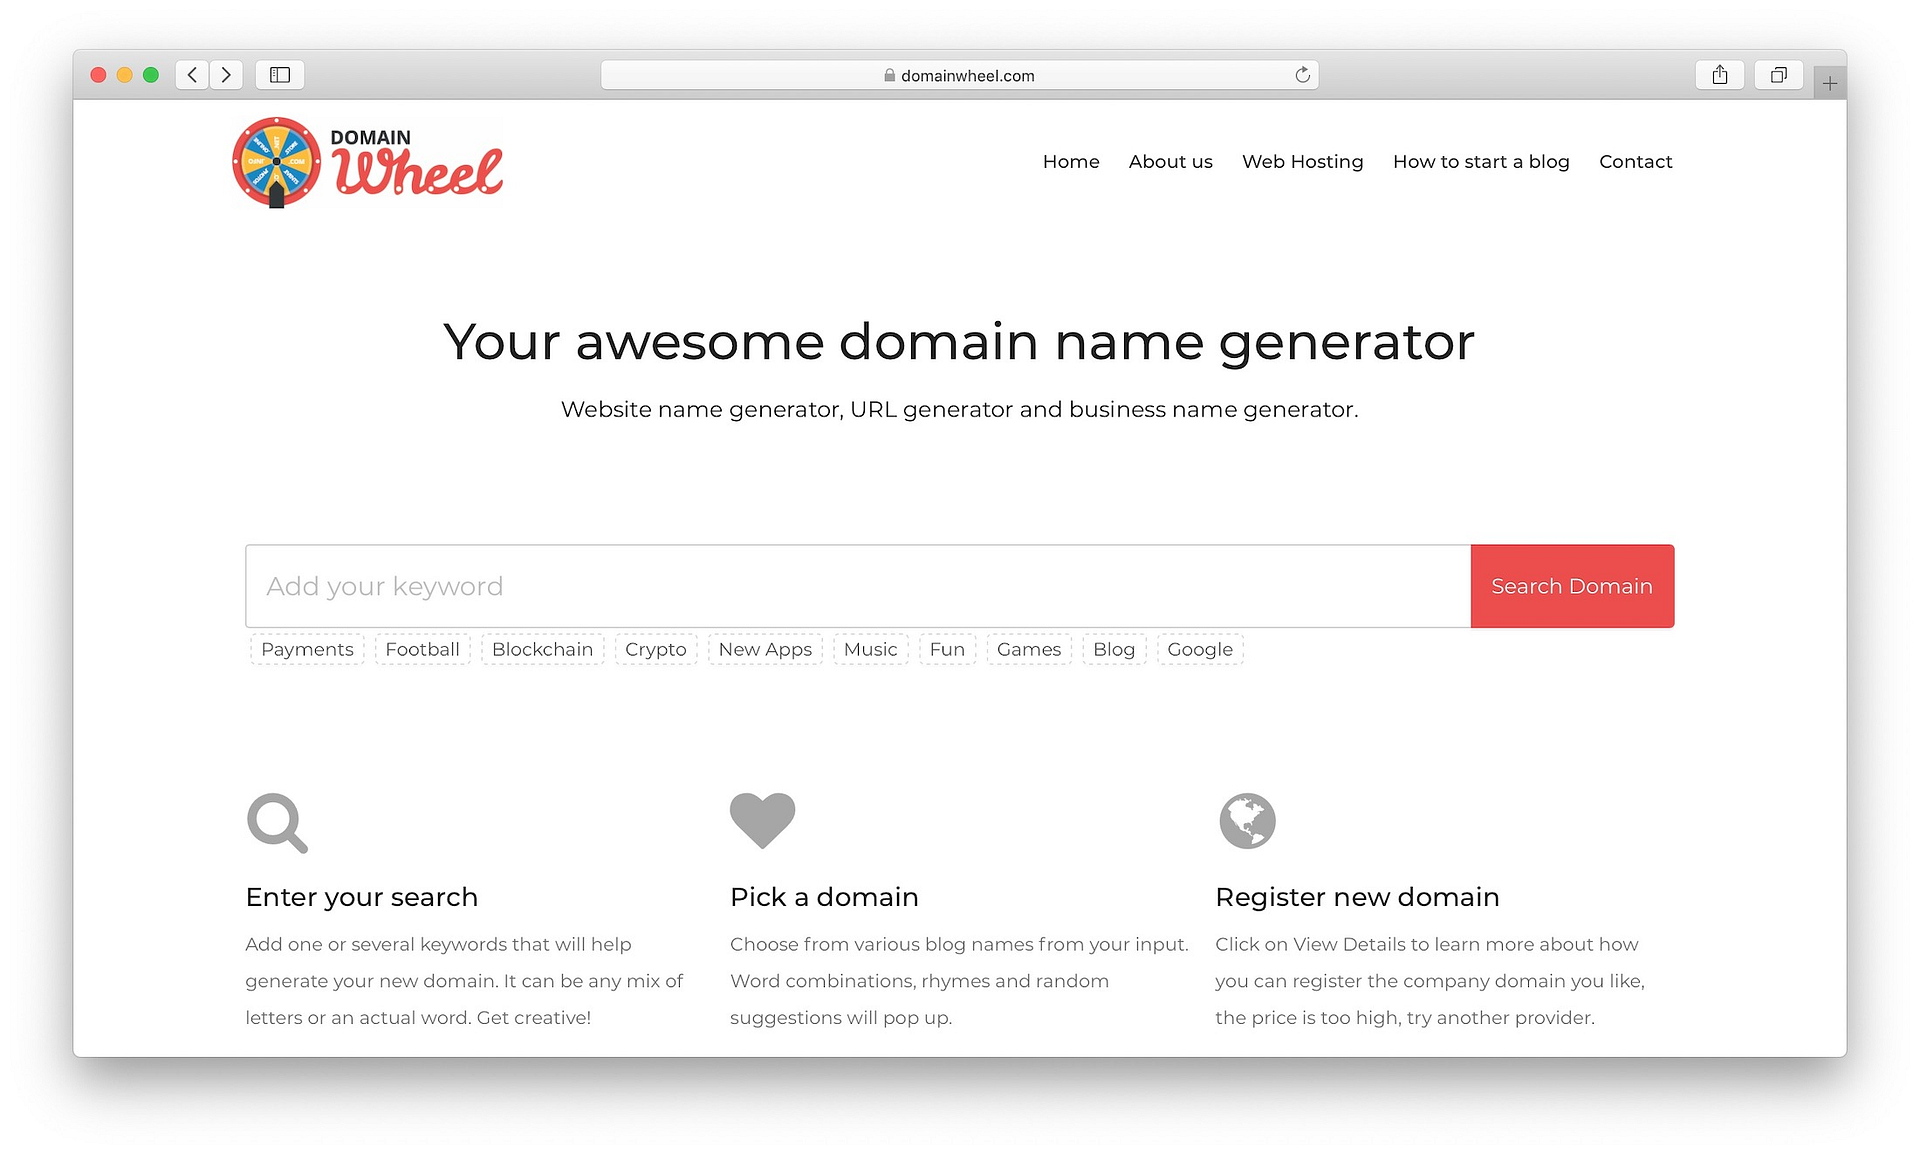 9 Best Blog Name Generators To Find Good Blog Name Ideas In 2020